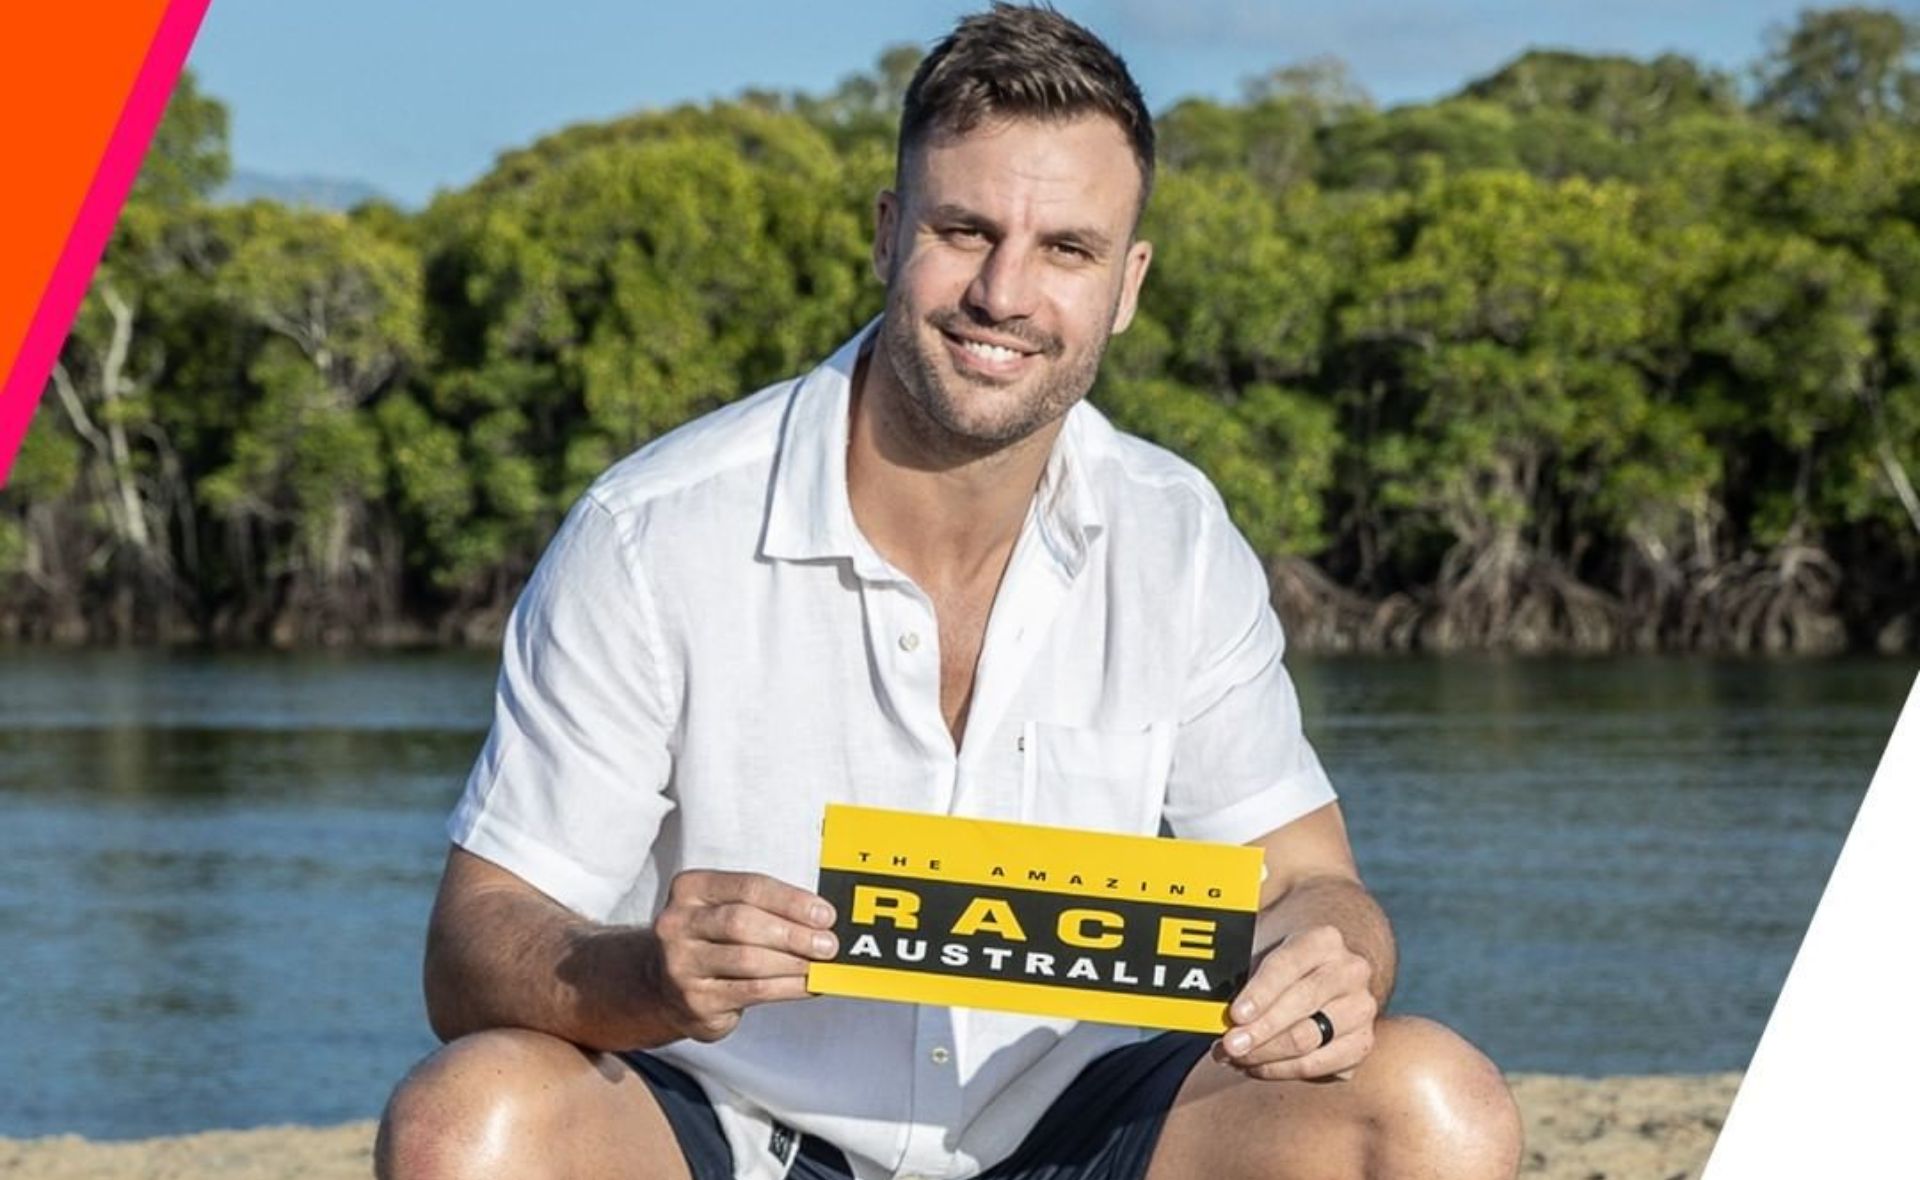 Has the winner of The Amazing Race Australia 2022 been leaked? Here is what we know